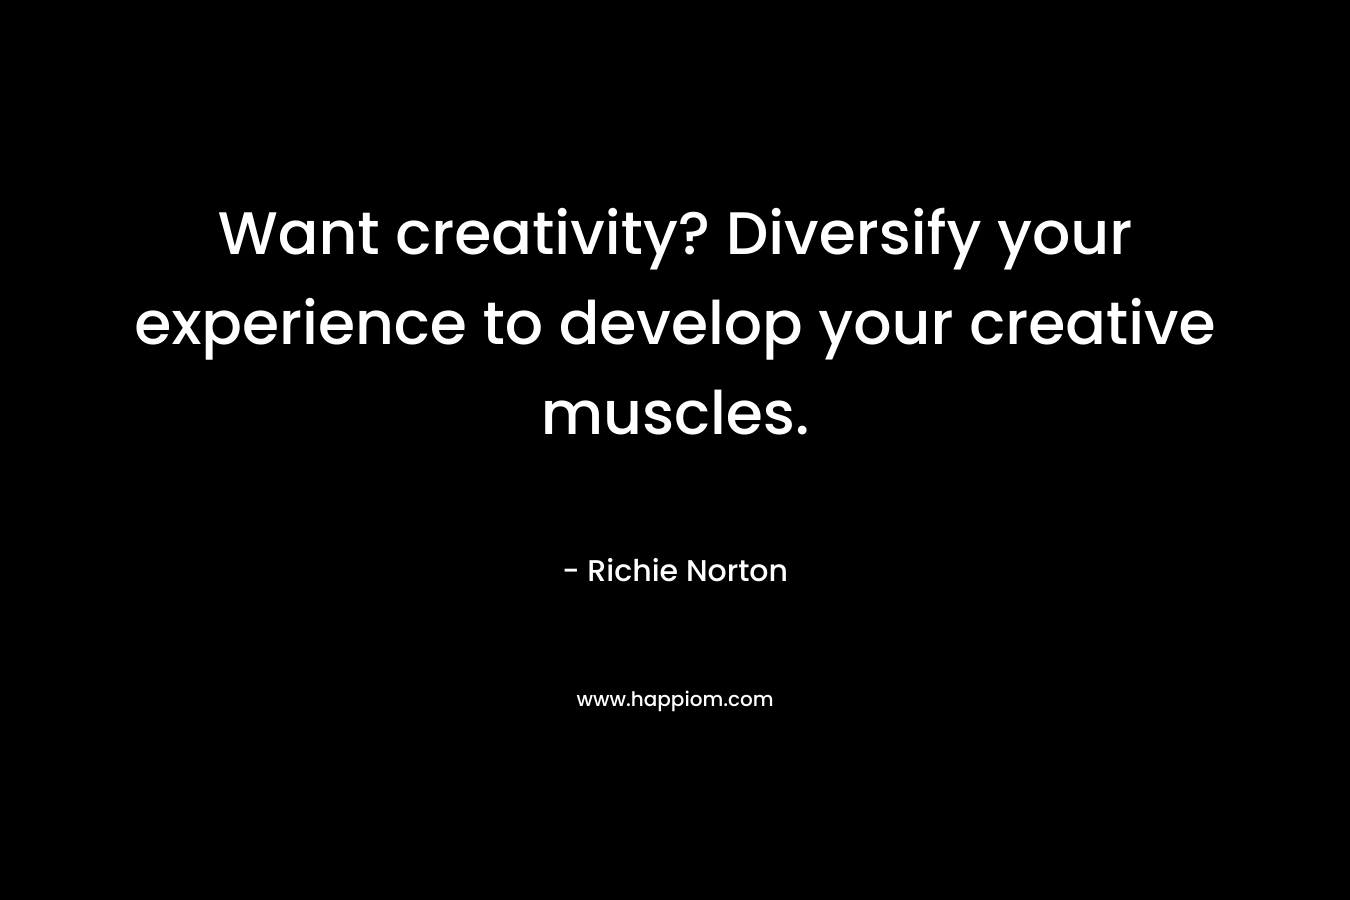 Want creativity? Diversify your experience to develop your creative muscles. – Richie Norton